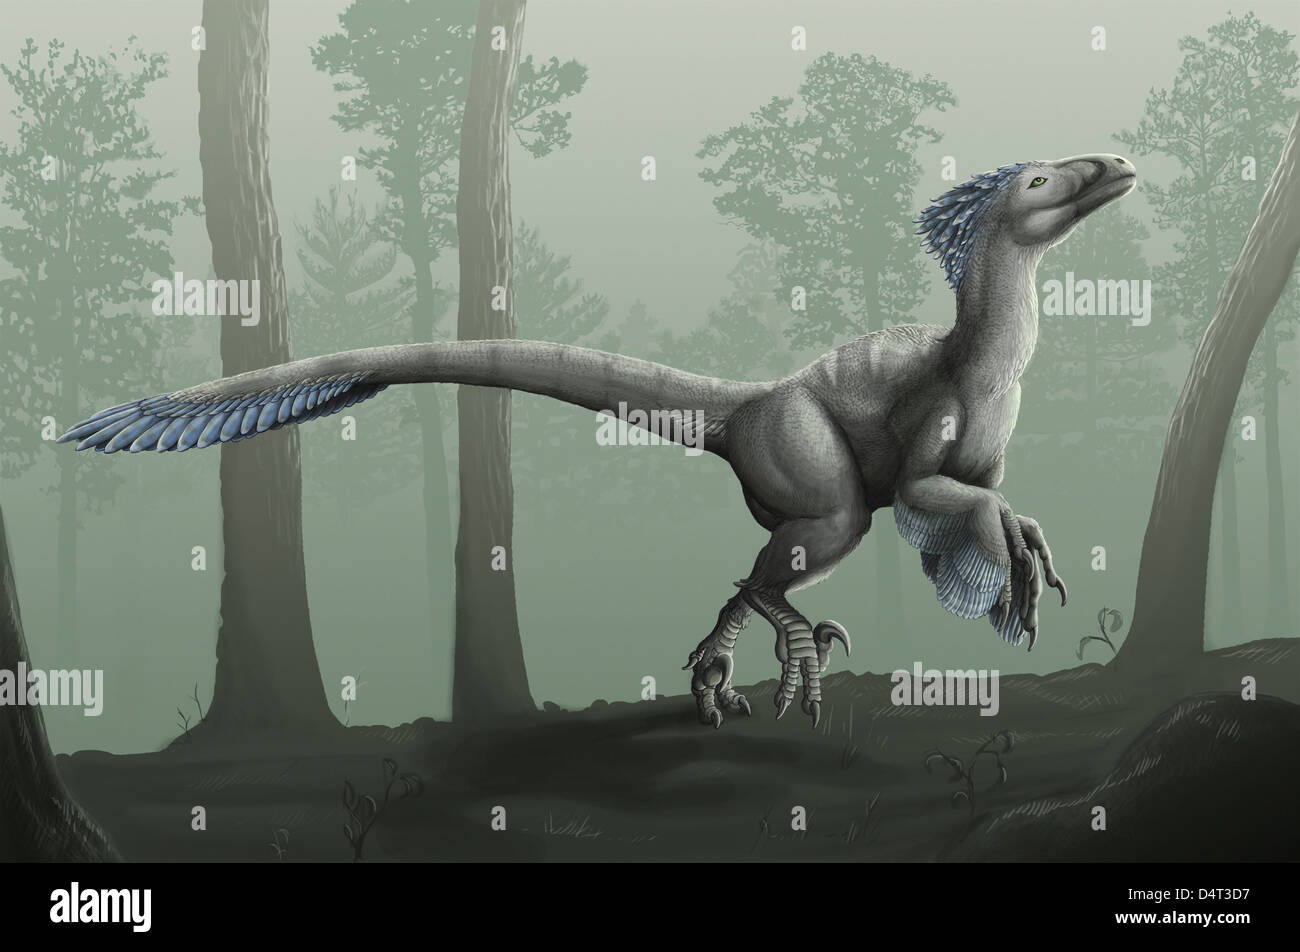 Reconstruction of a feathered Deinonychus antirrhopus. The morphology